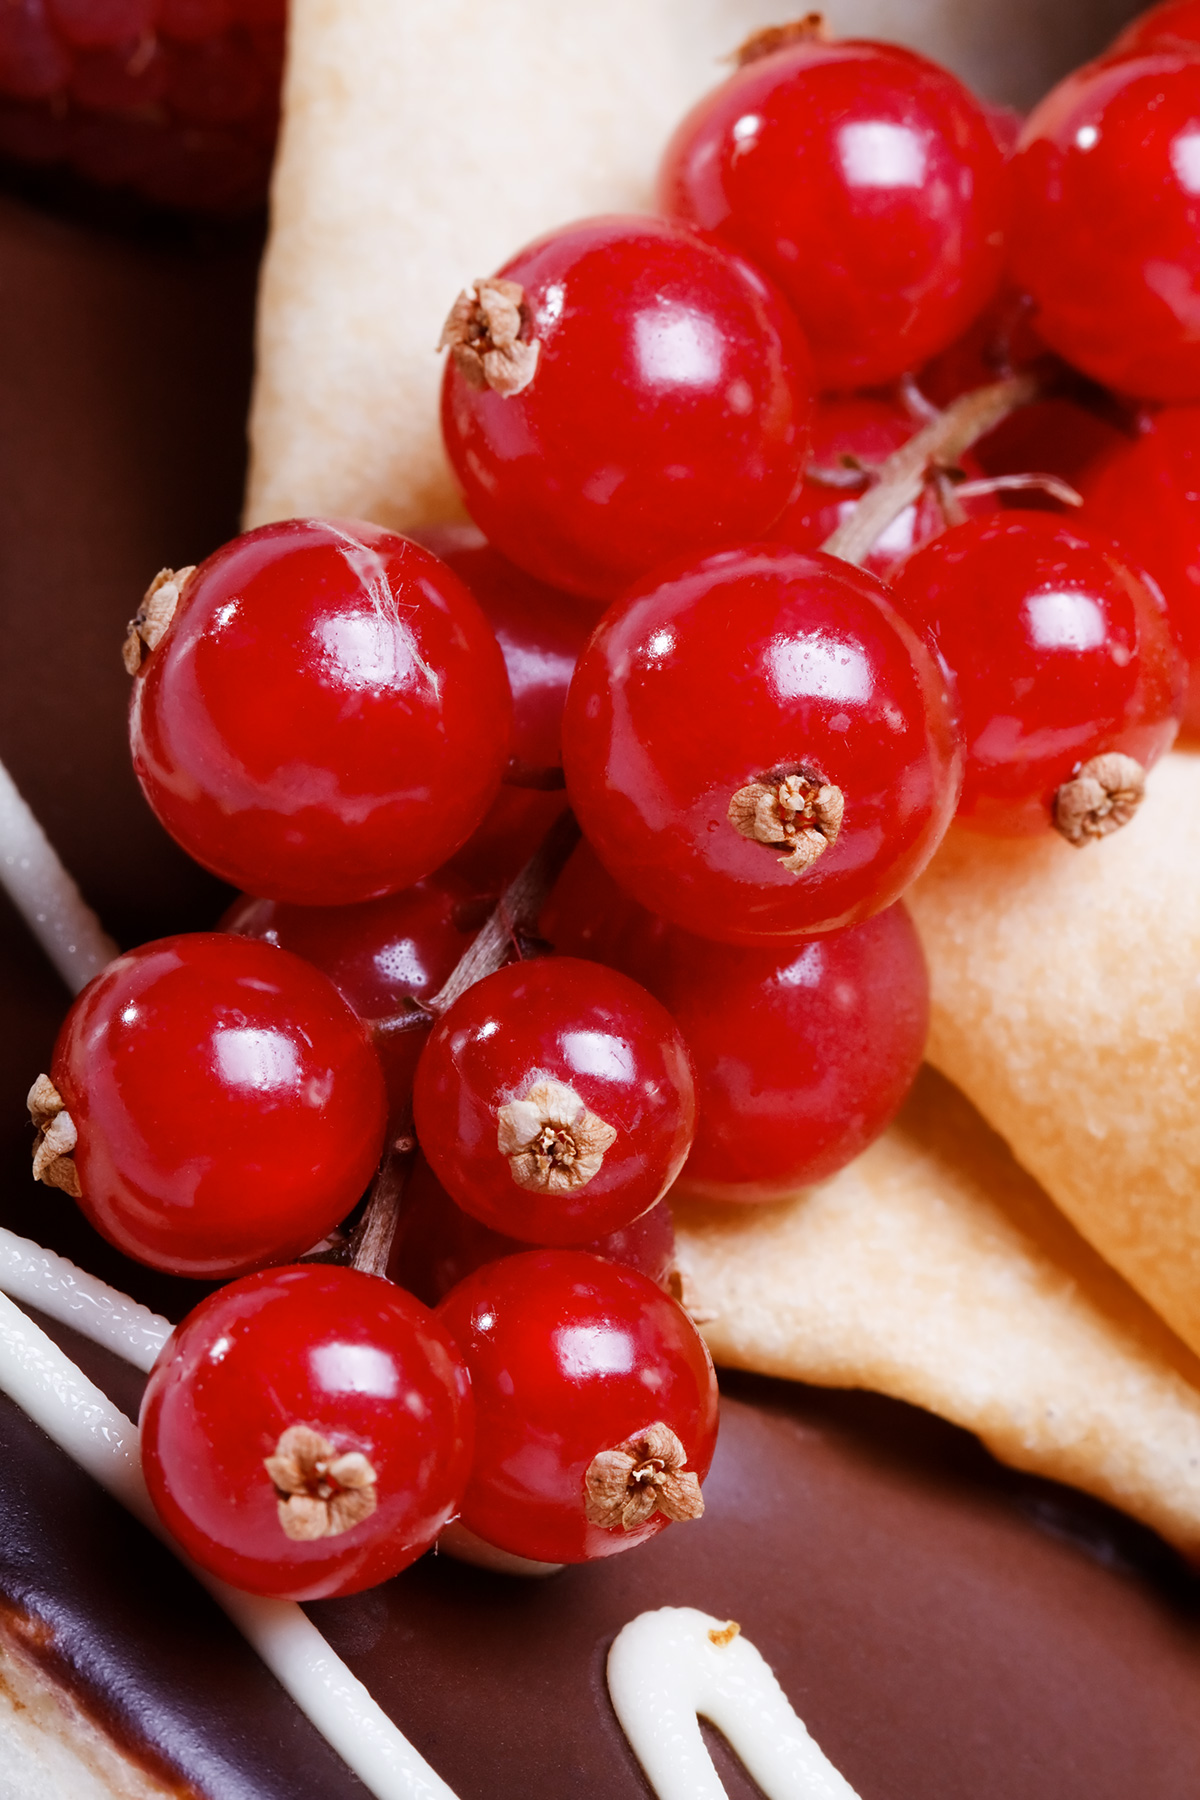 Red currant on a cake